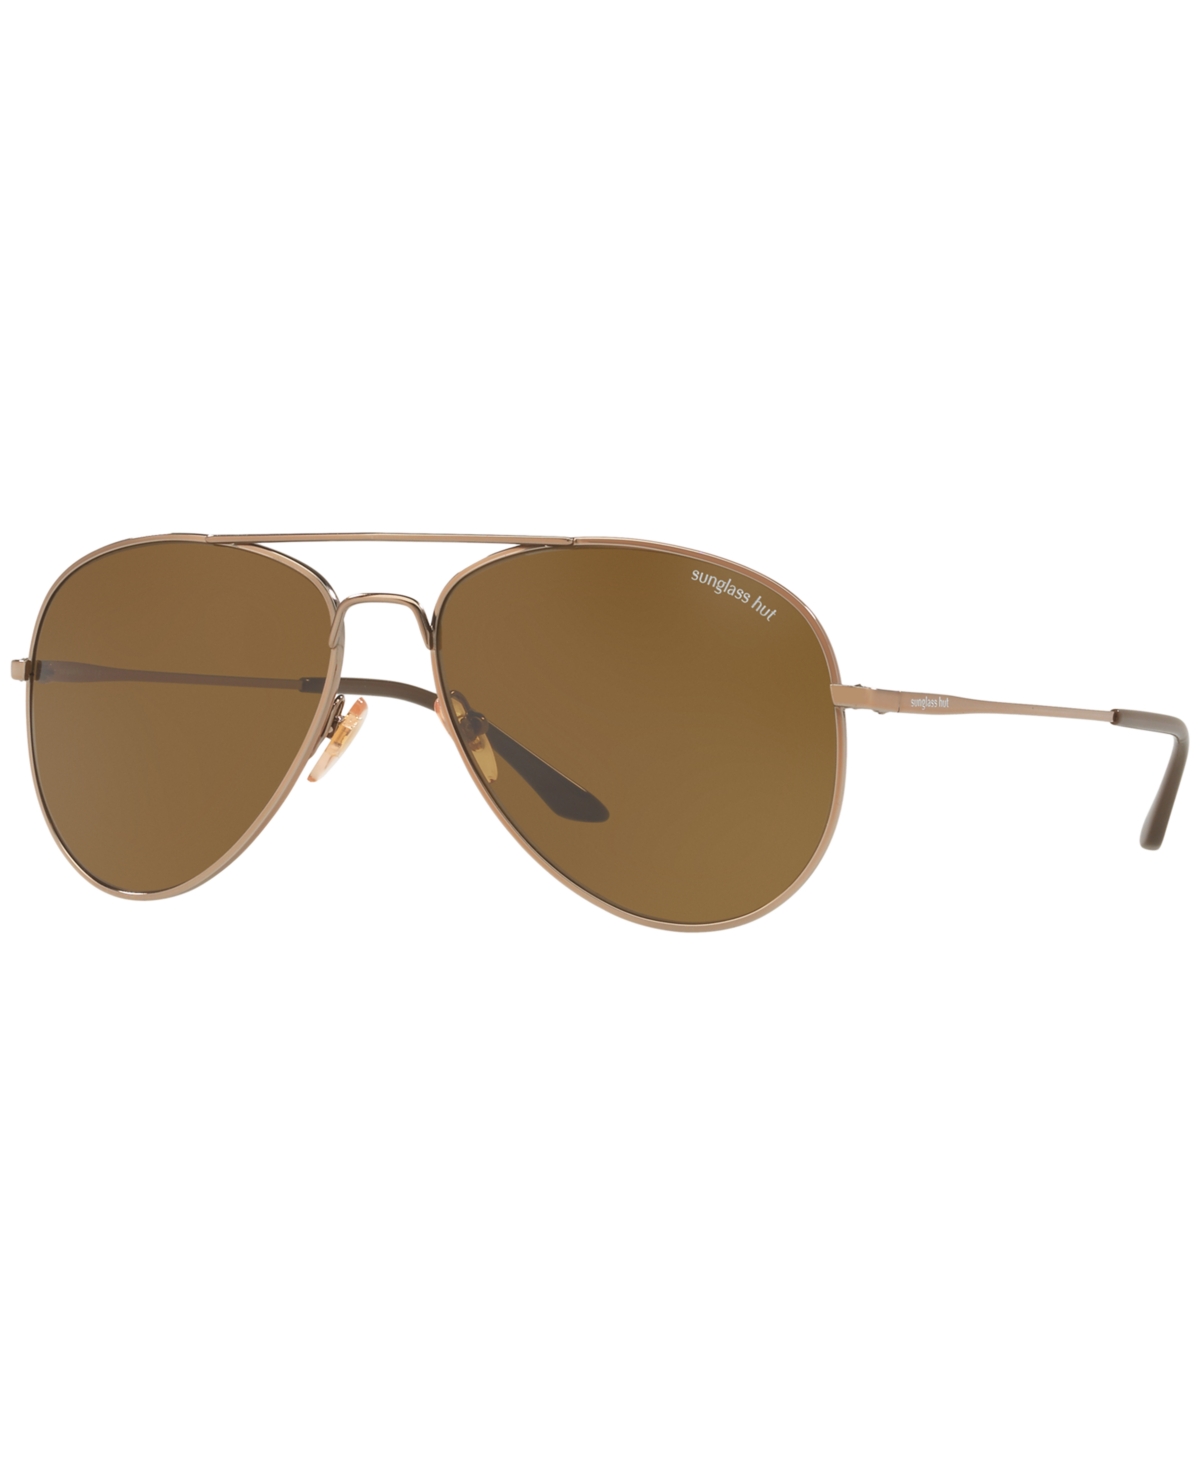 Sunglass Hut Collection Sunglasses, Hu1001 59 In Brown,brown